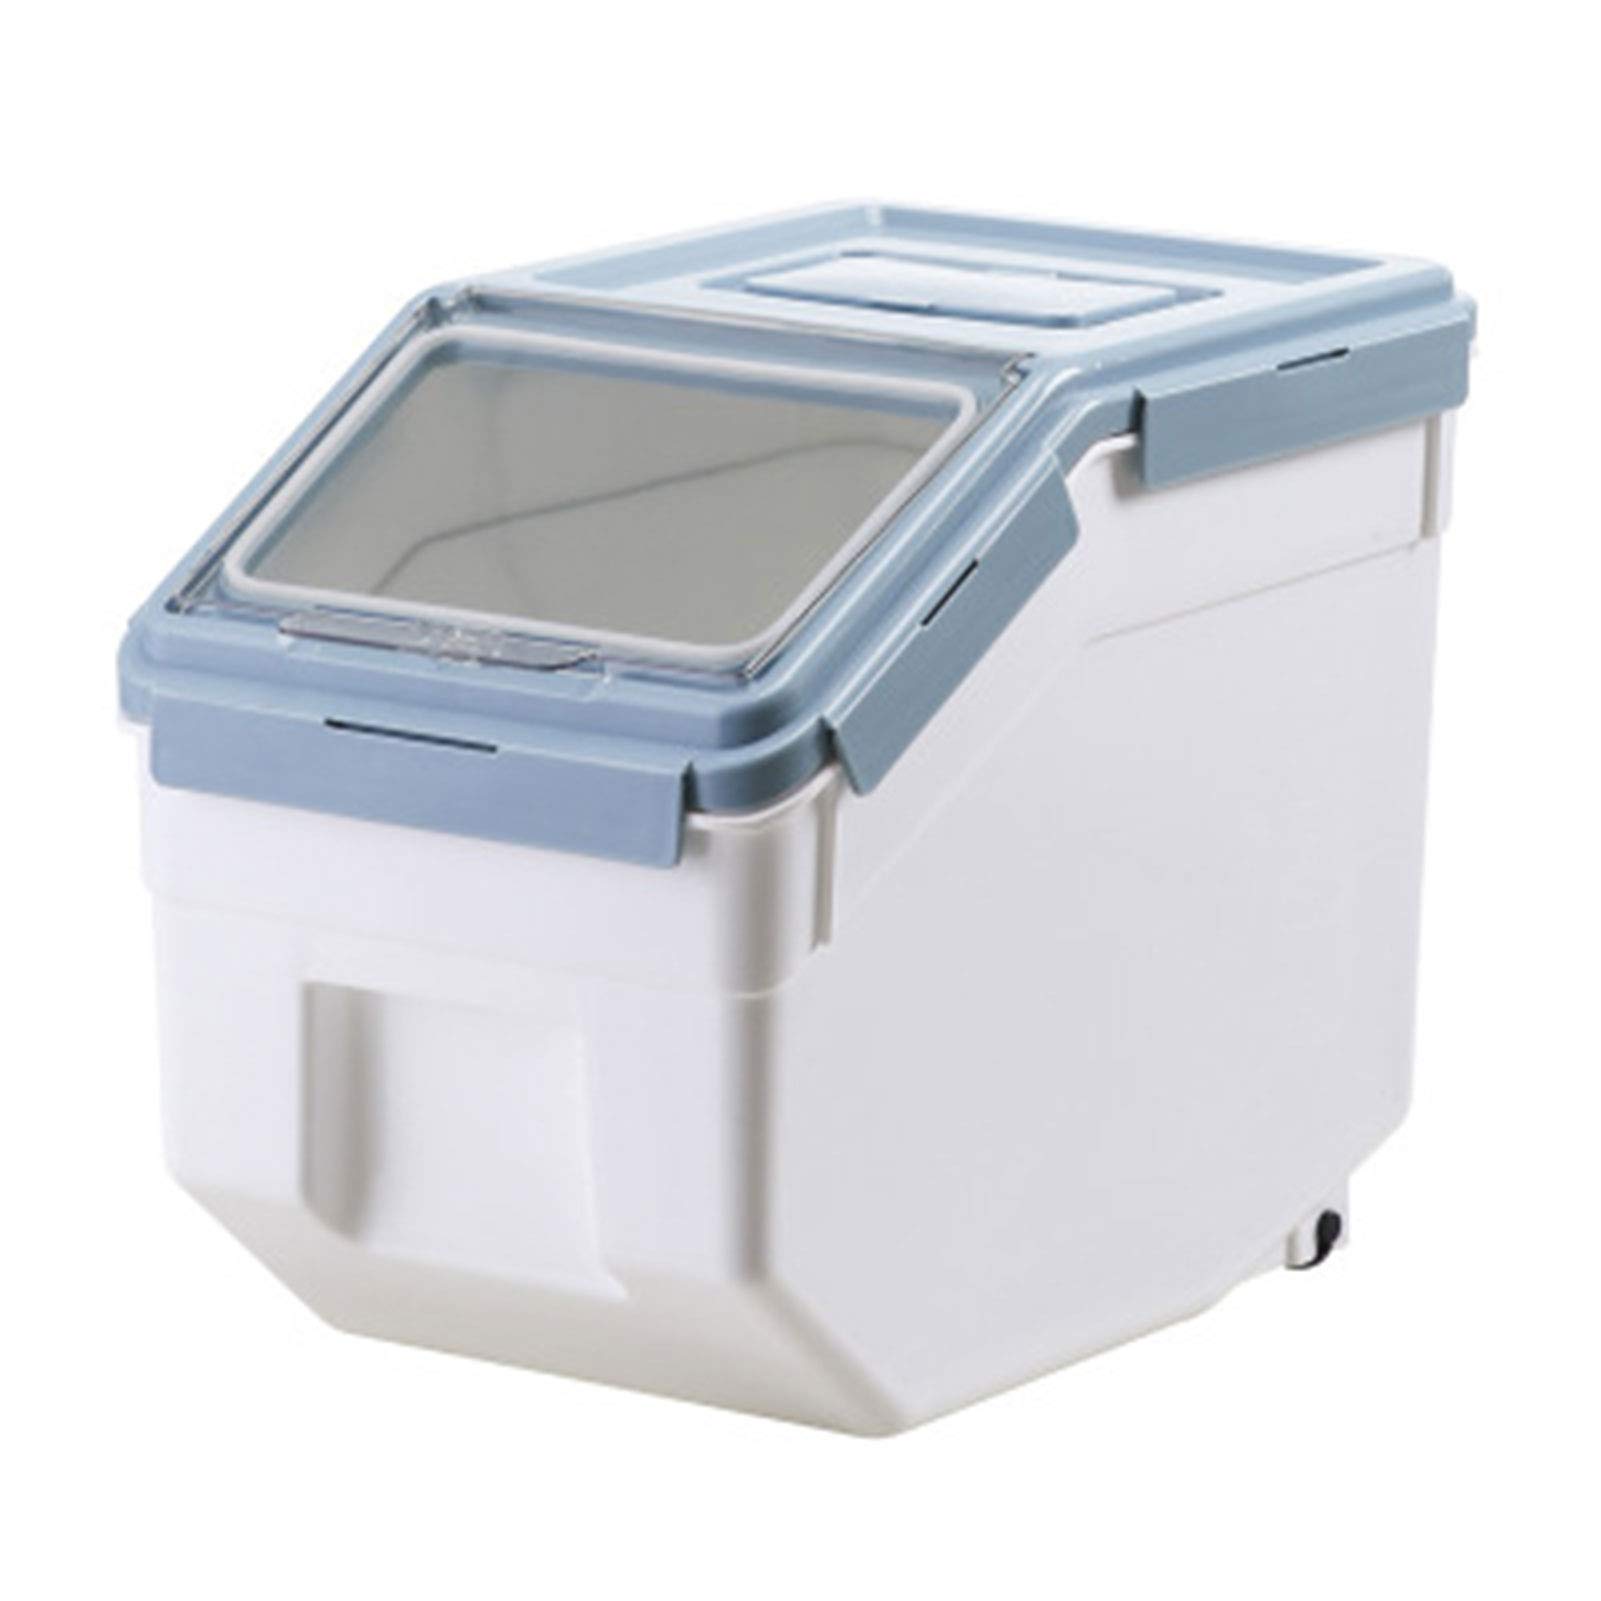 Cats Airtight Pet Food Container Storage Box